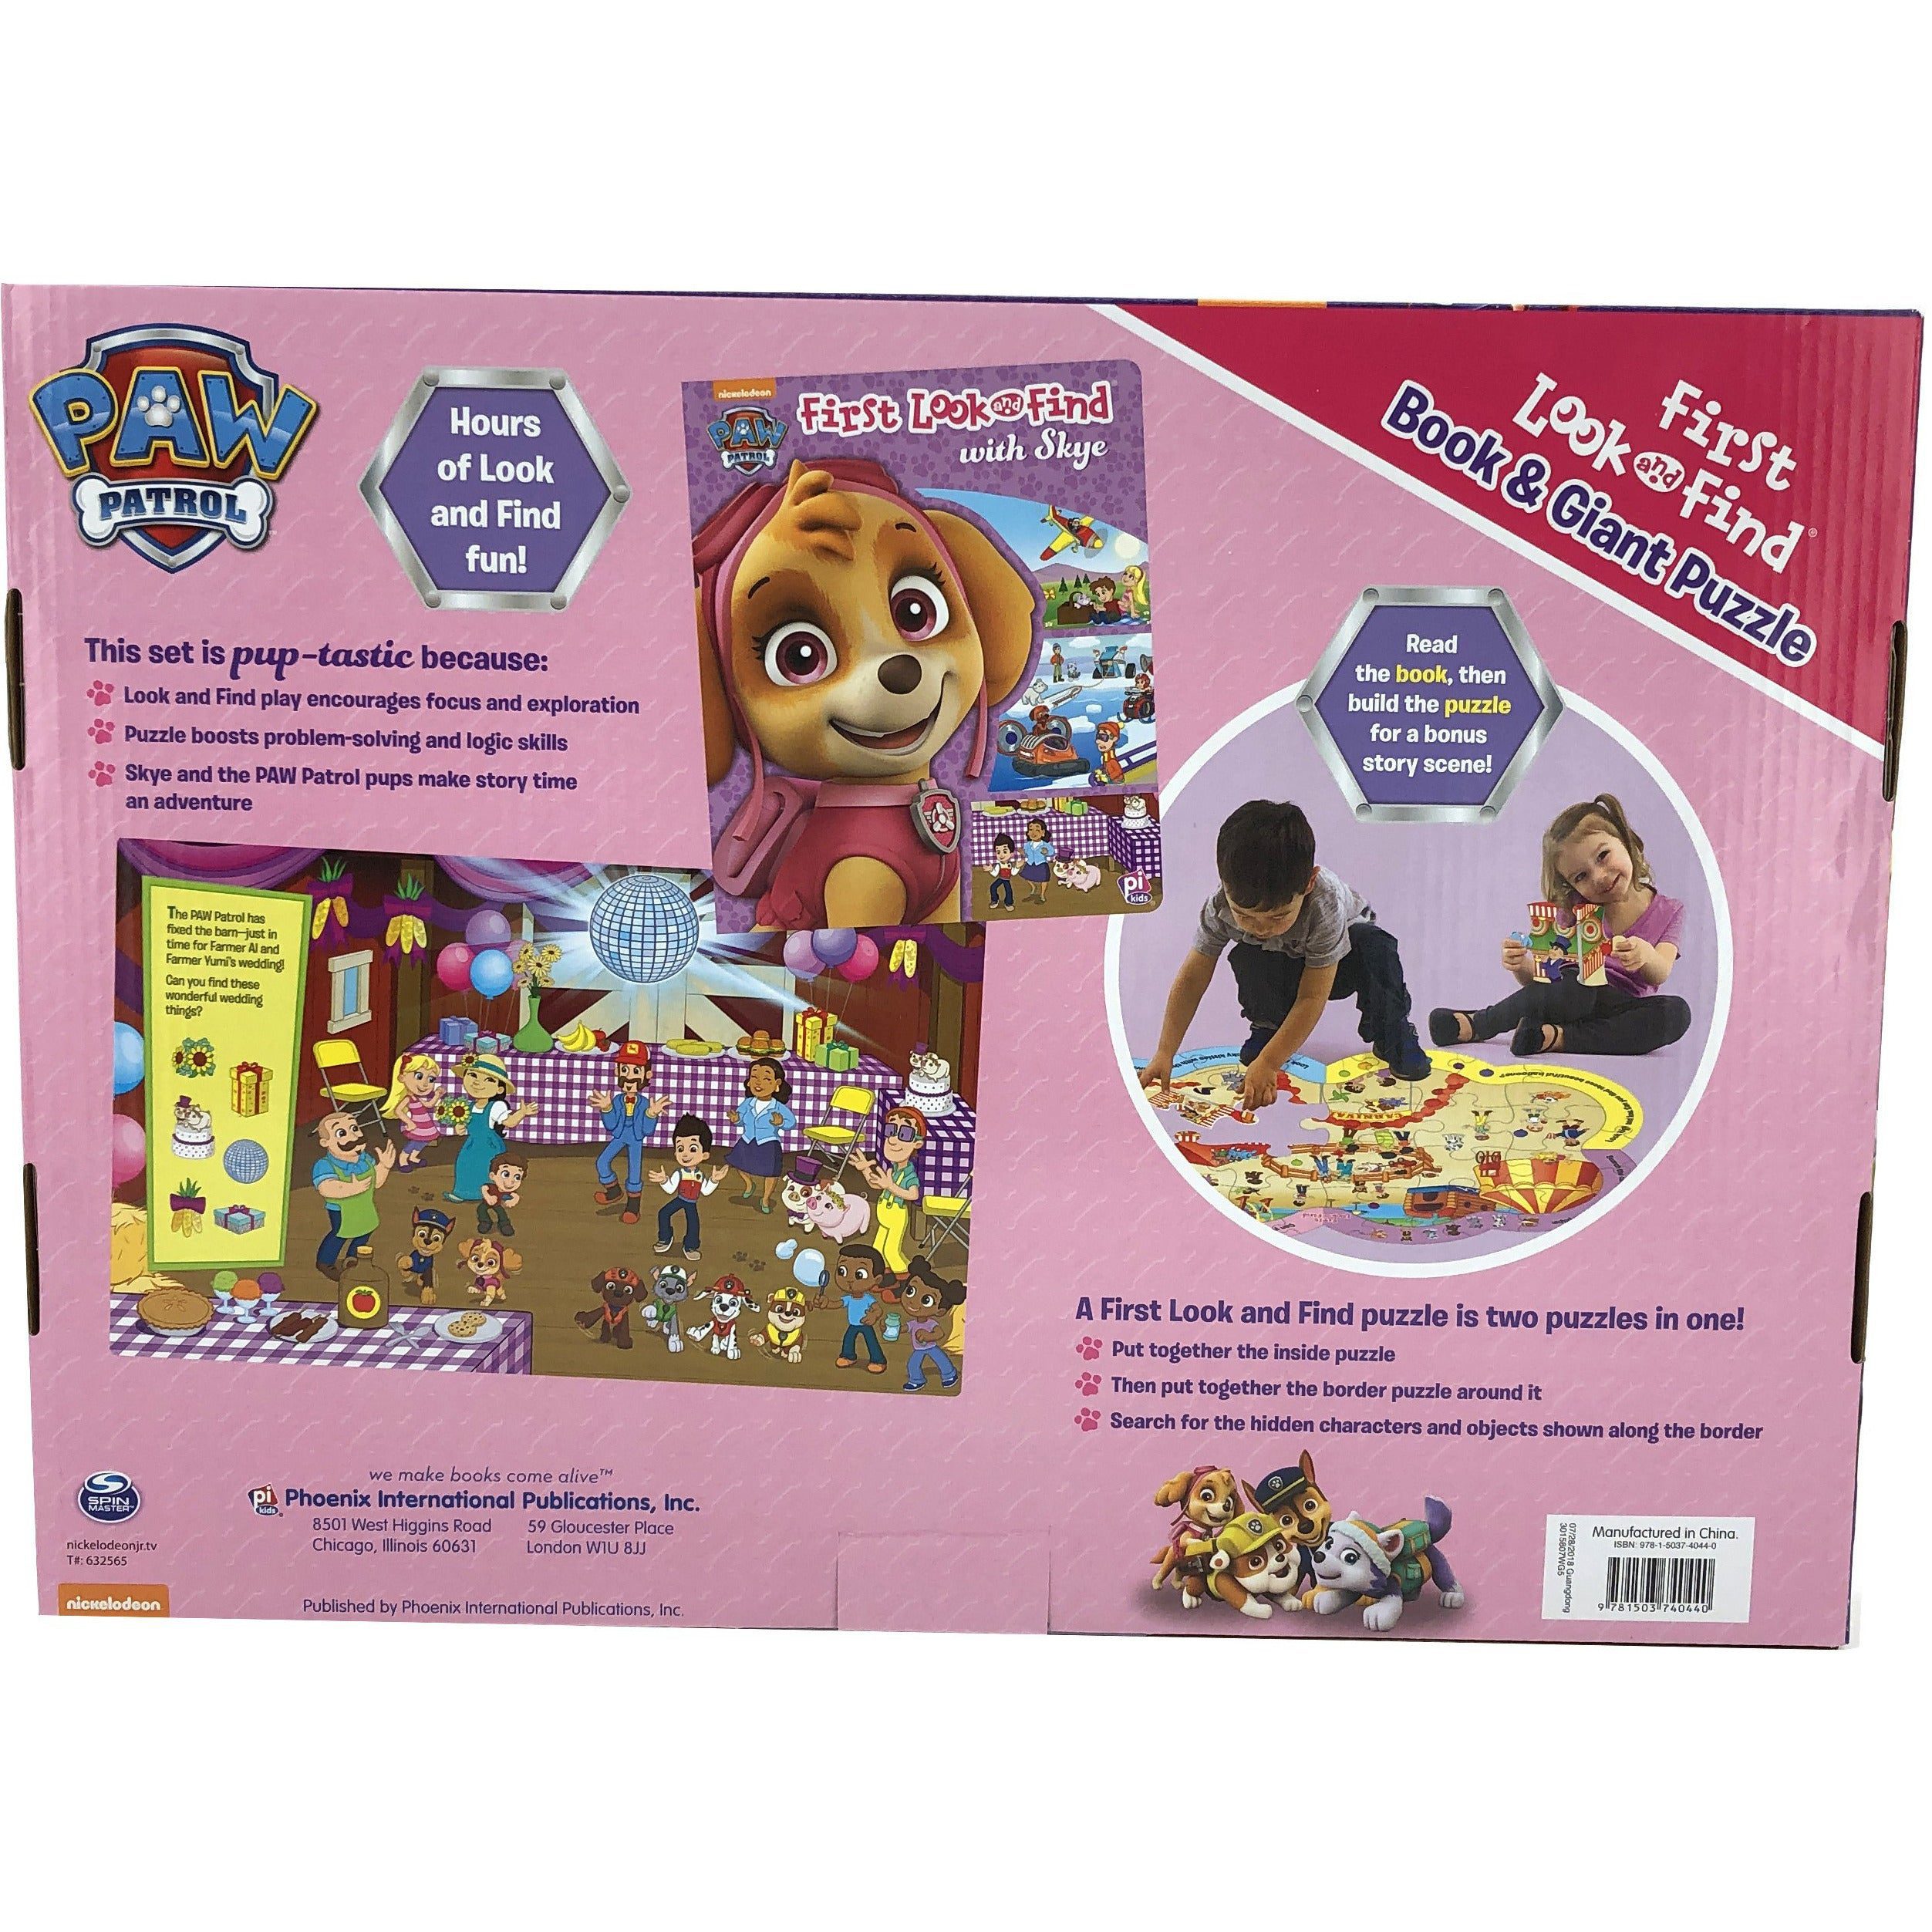 Nickelodeon Paw Patrol with Skye Board Book and Floor Jigsaw Puzzle Play Set / 40 Piece Puzzle / First Look and Find / Toy / Ages 3+